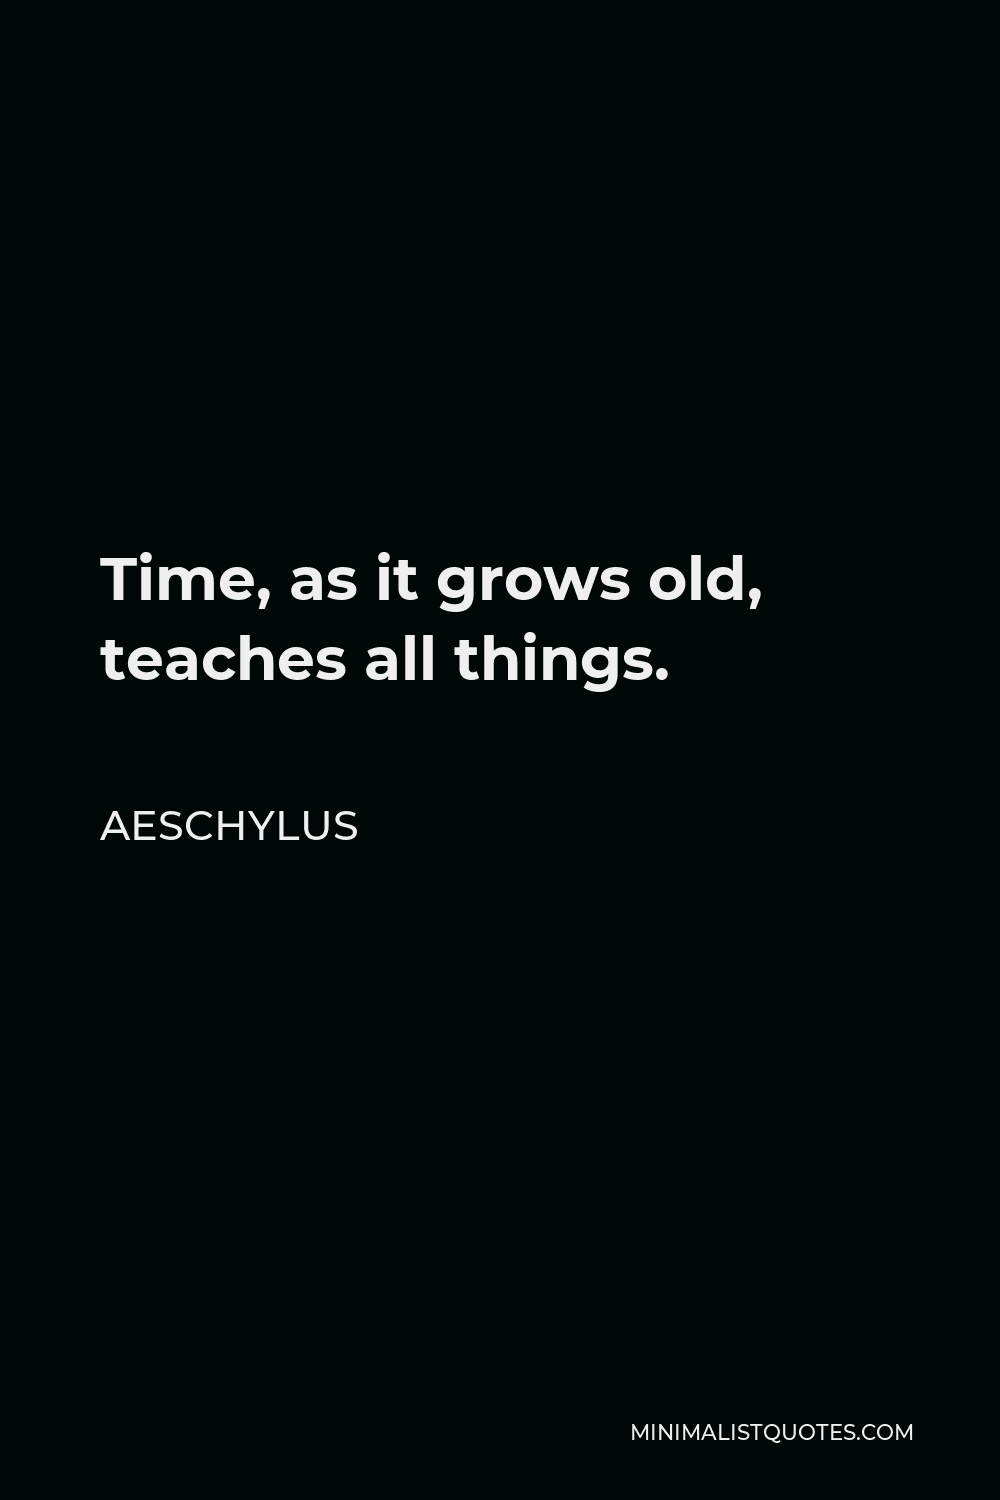 Aeschylus Quote - Time, as it grows old, teaches all things.